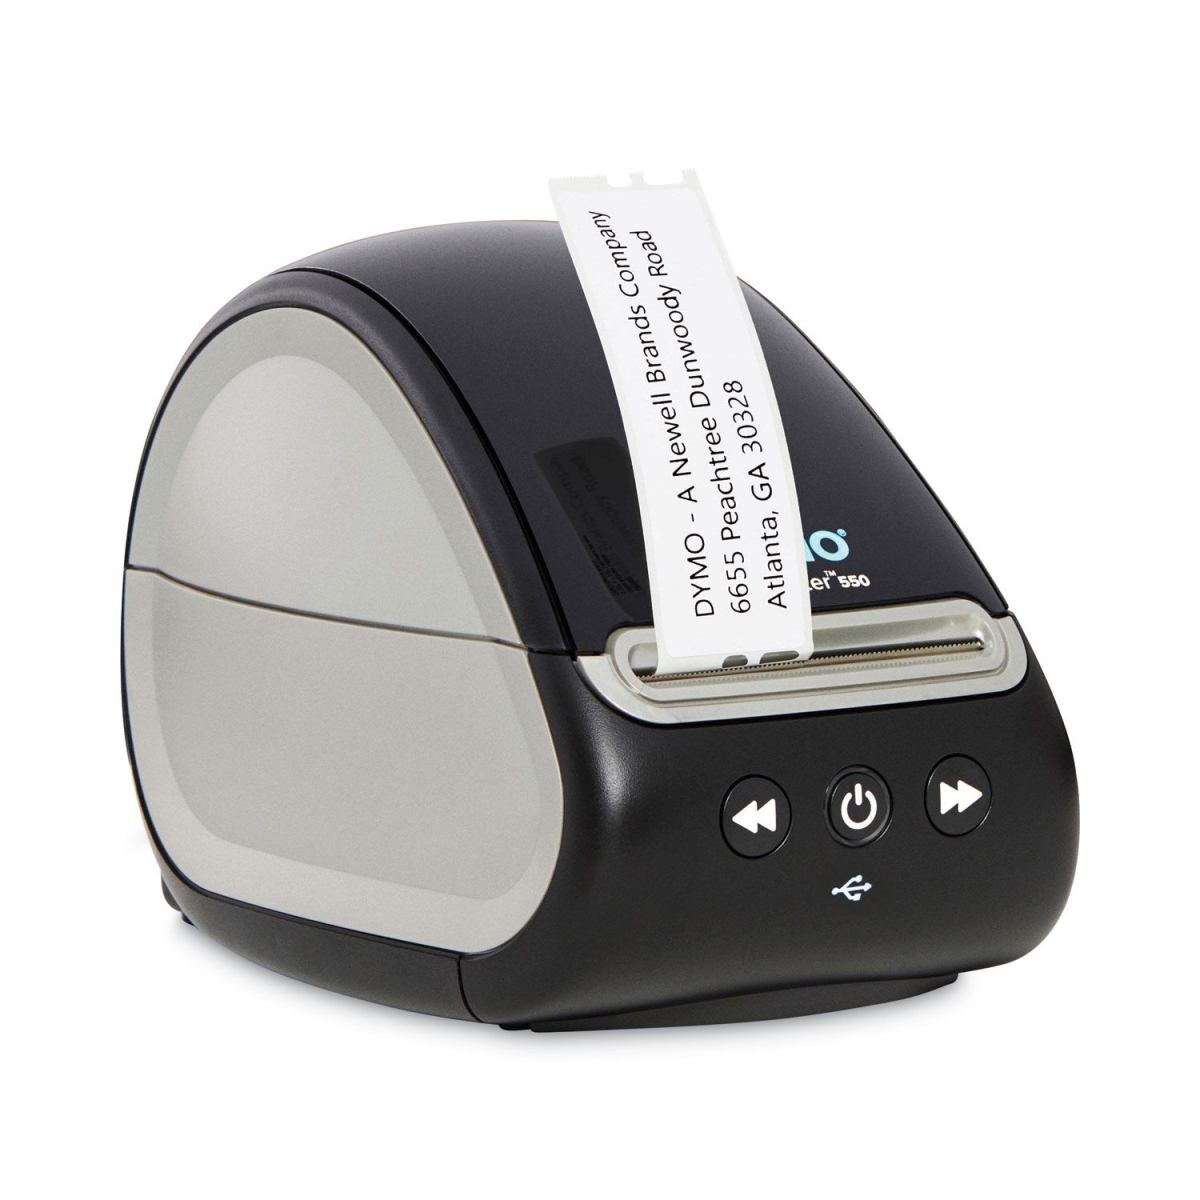 Picture of Dymo 2112552 Label Writer 550 Label Printer